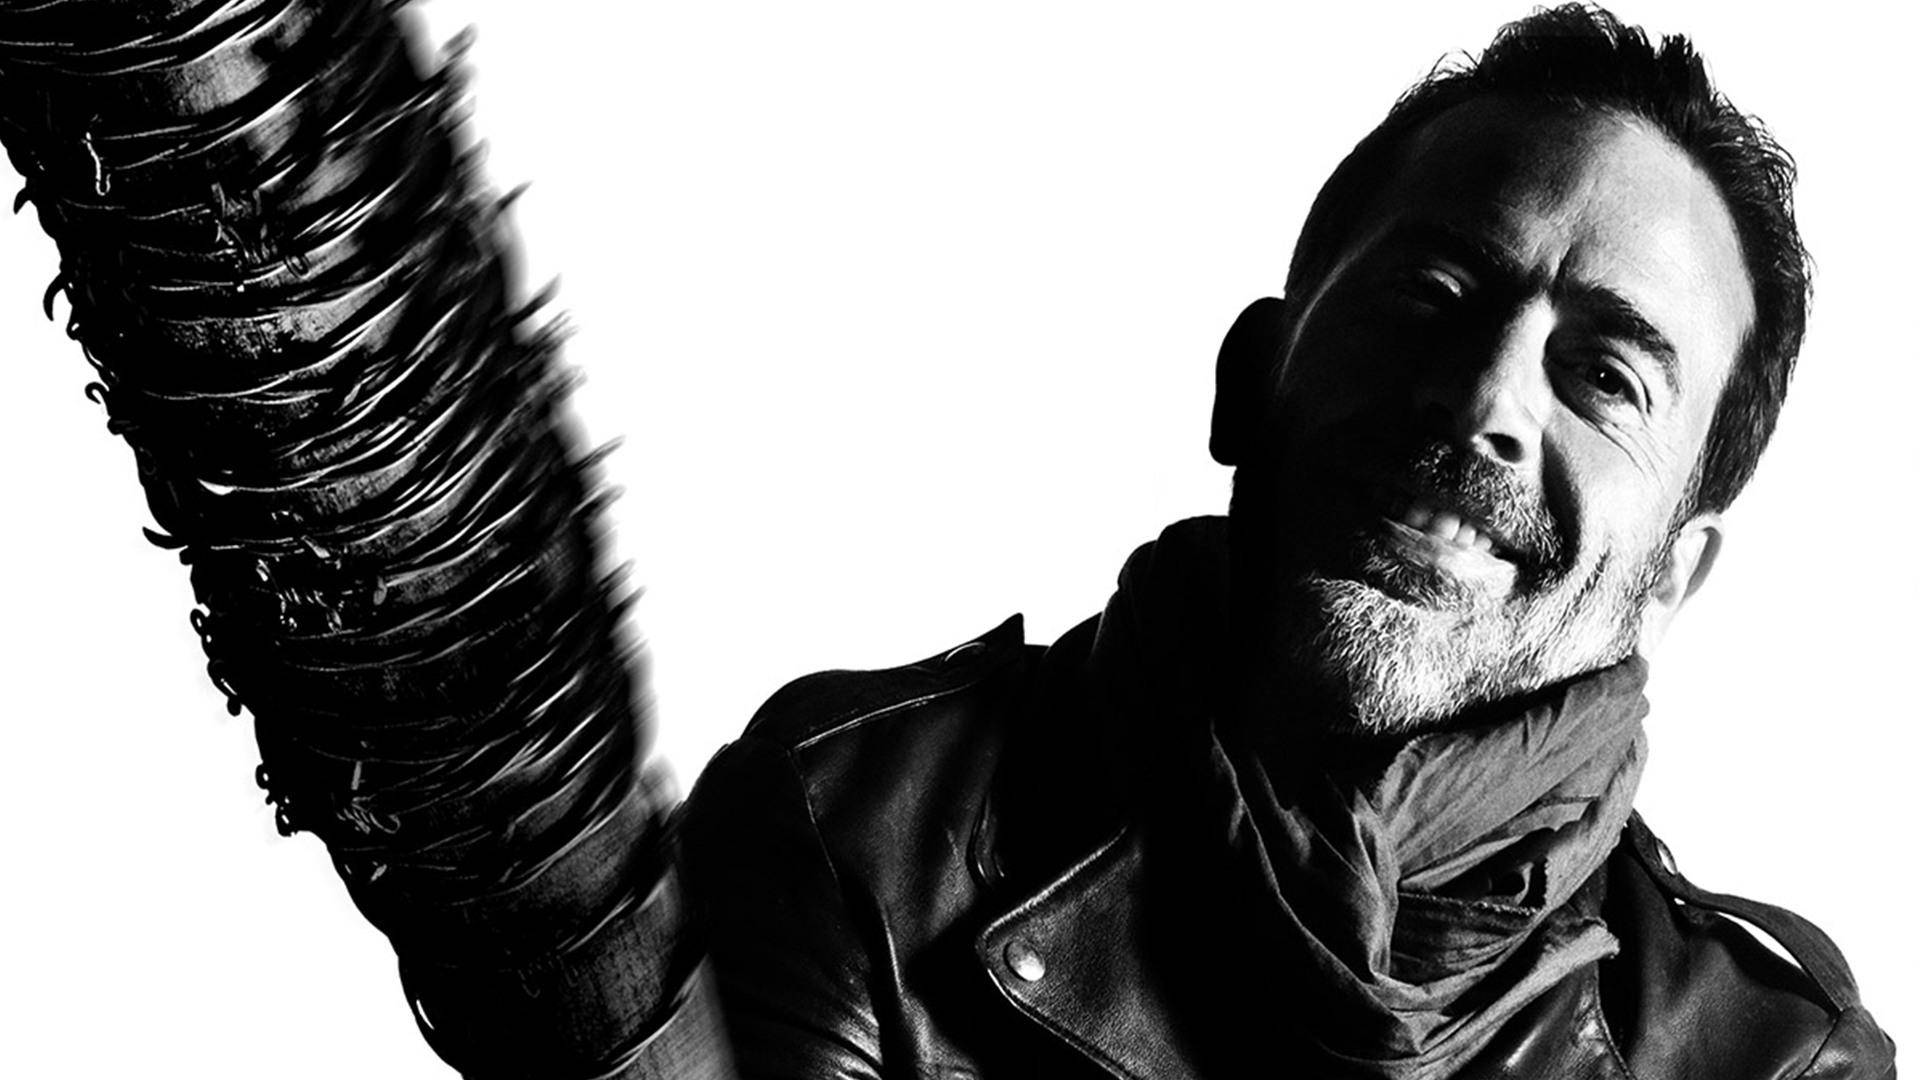 Wallpaper ID 333757  TV Show The Walking Dead Phone Wallpaper Negan The  Walking Dead Jeffrey Dean Morgan 1440x2560 free download